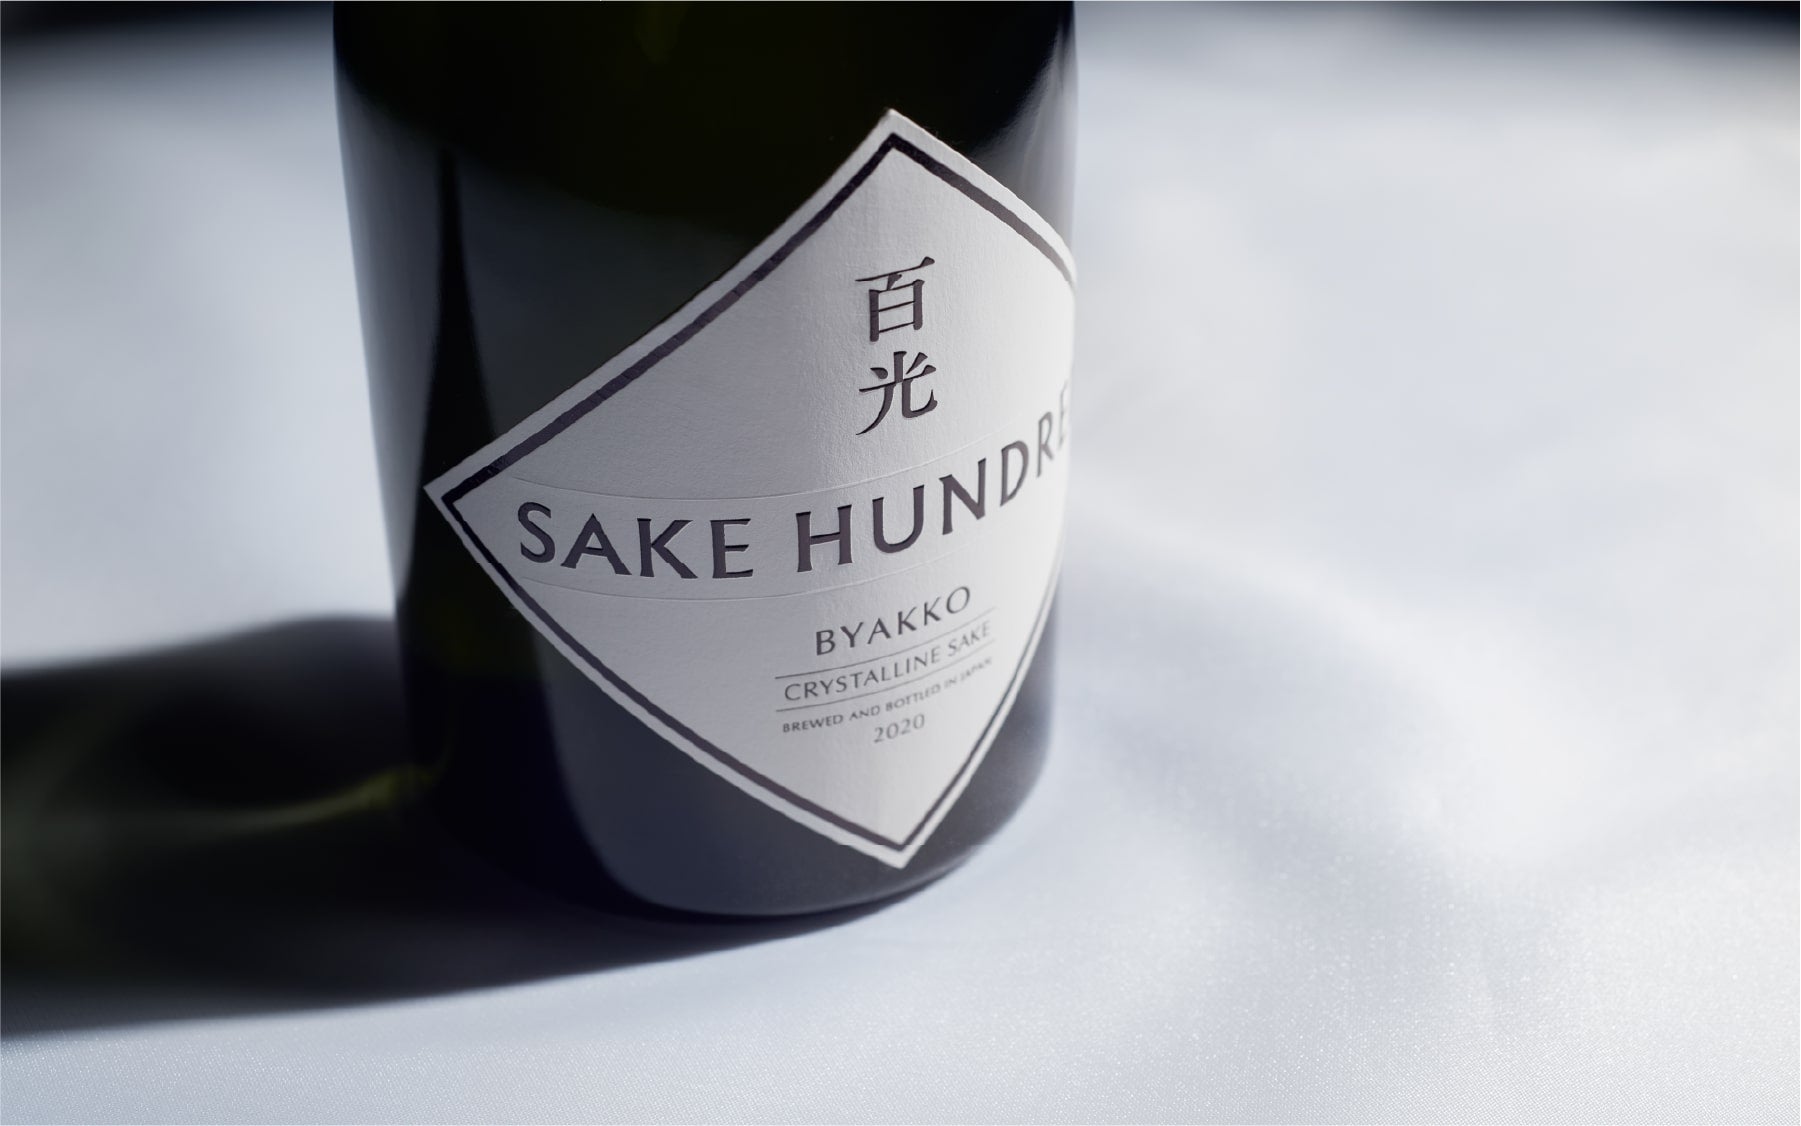 A New Creative Direction Embodies Our Brand Ethos – SAKE HUNDRED